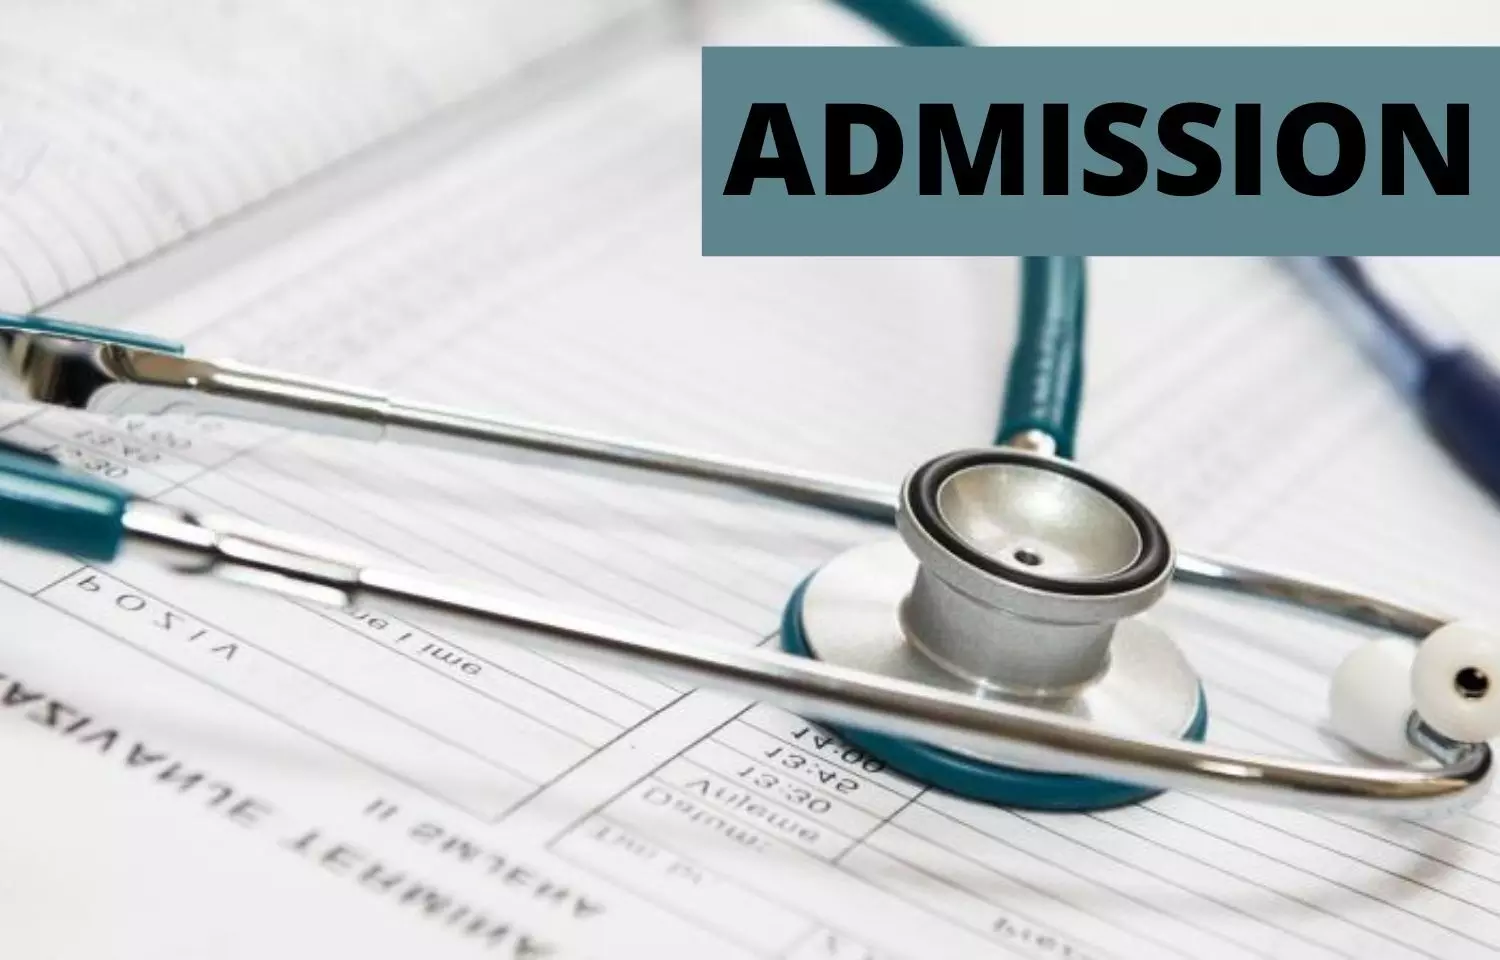 AIIMS INI CET 2022: Candidates who complete internship after 30th June not eligible for PGIMER admissions